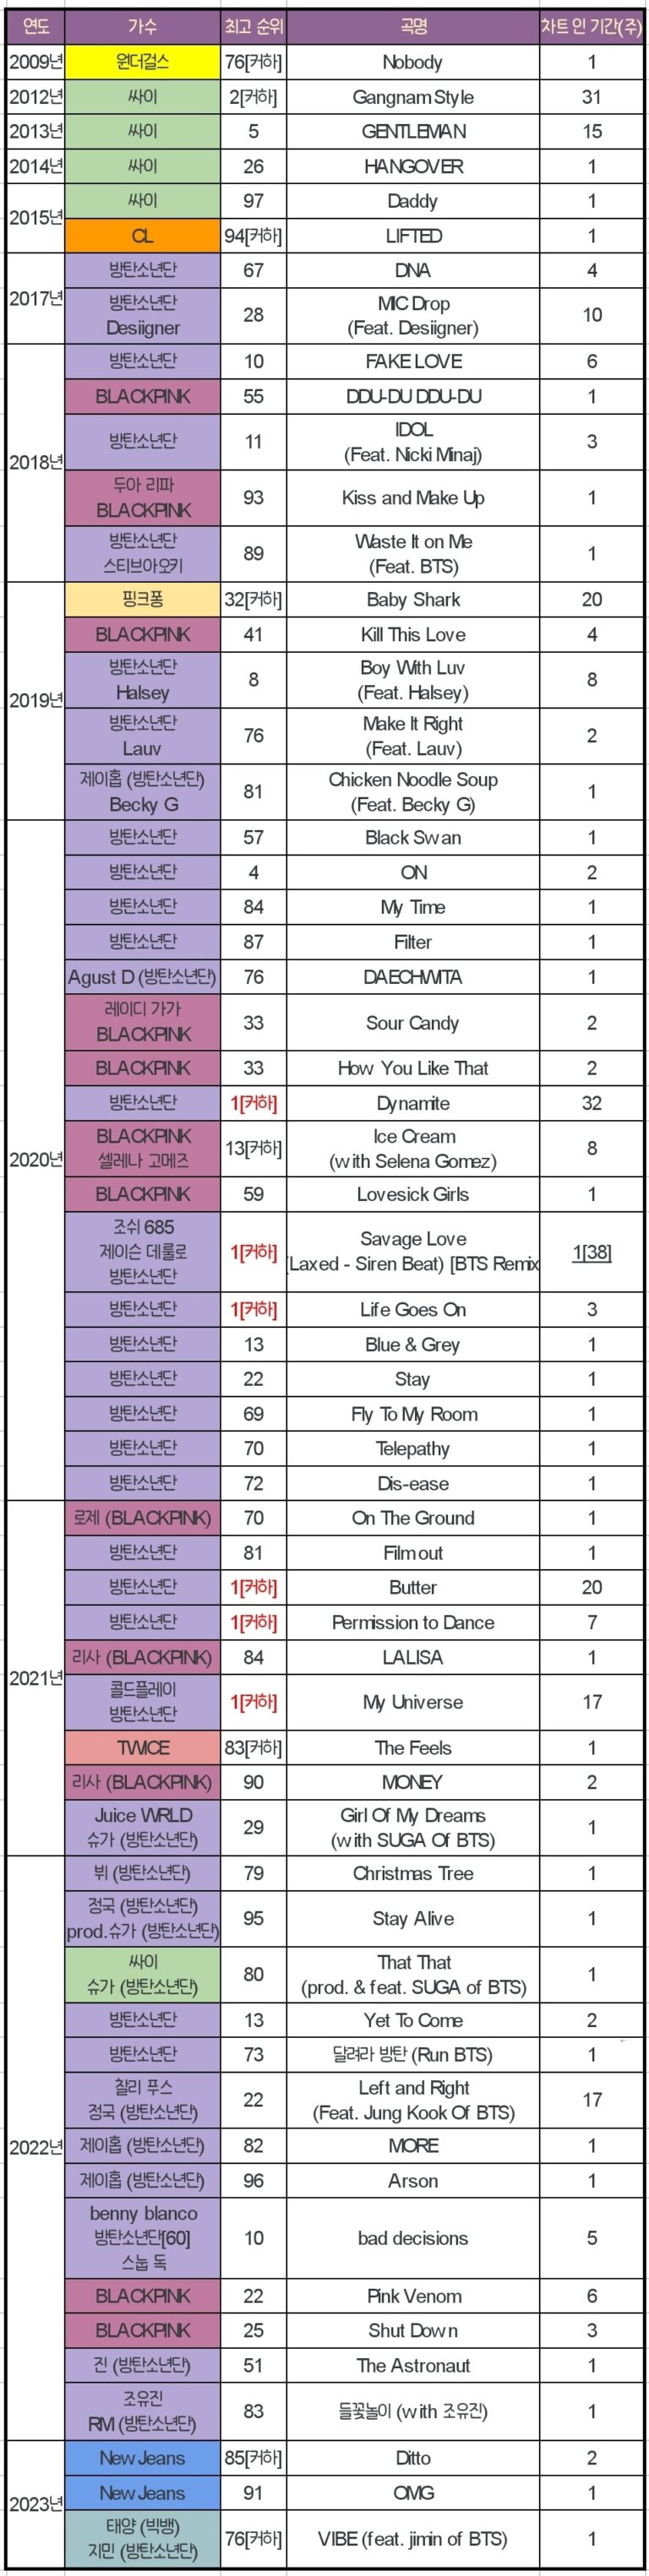 Records of Korean singers on Billboard Hot 100 of all time